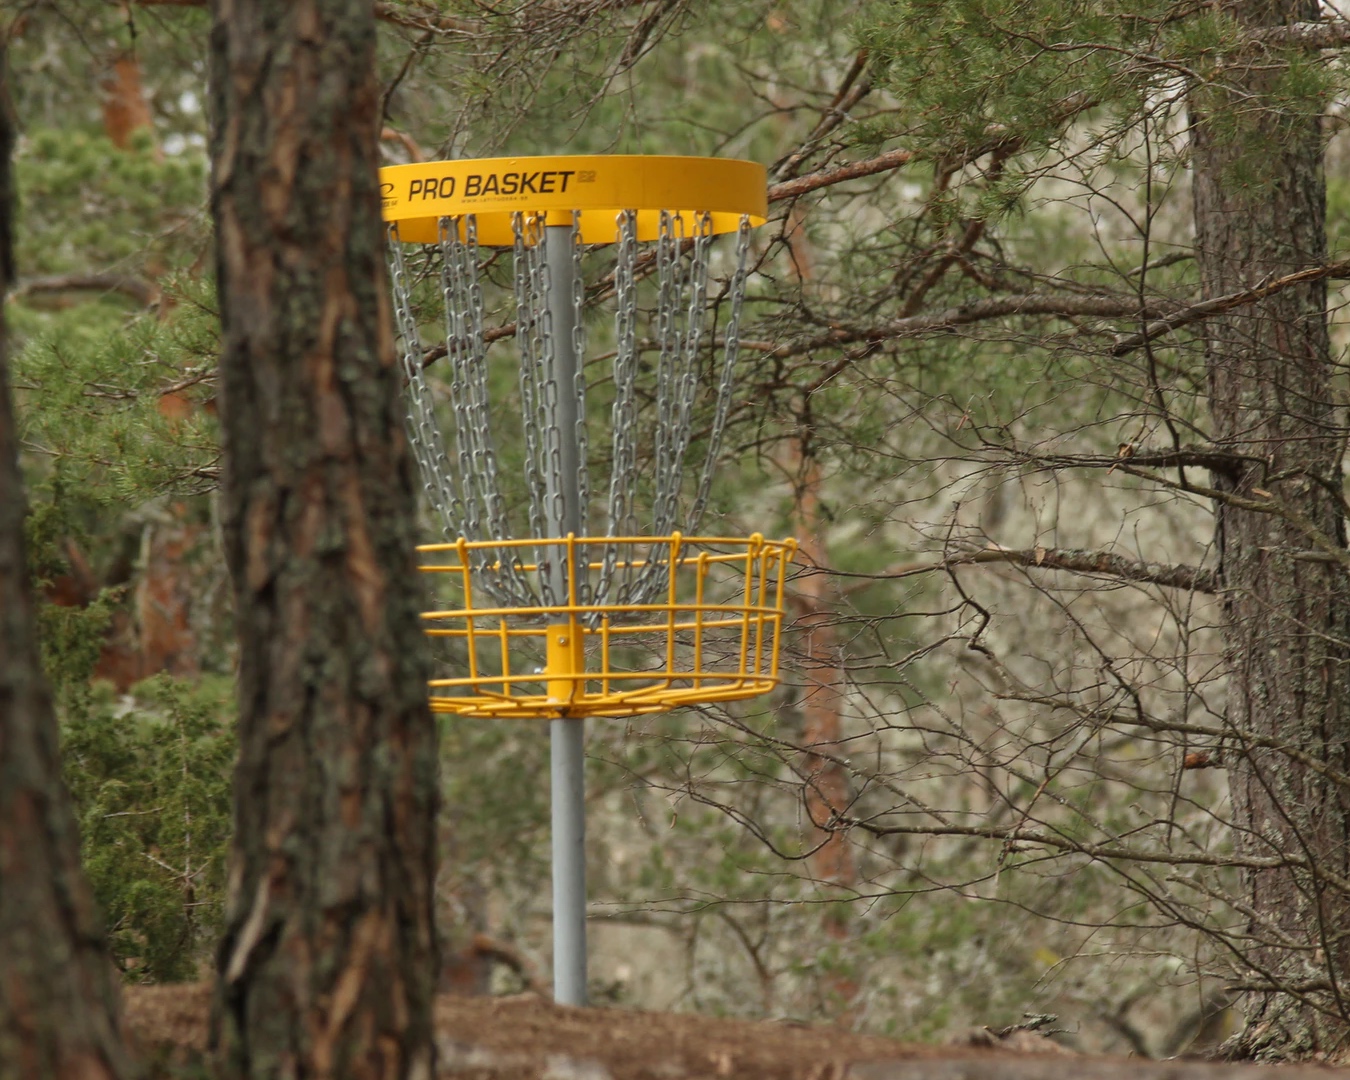 A disc golf basket in the middle of a forest.